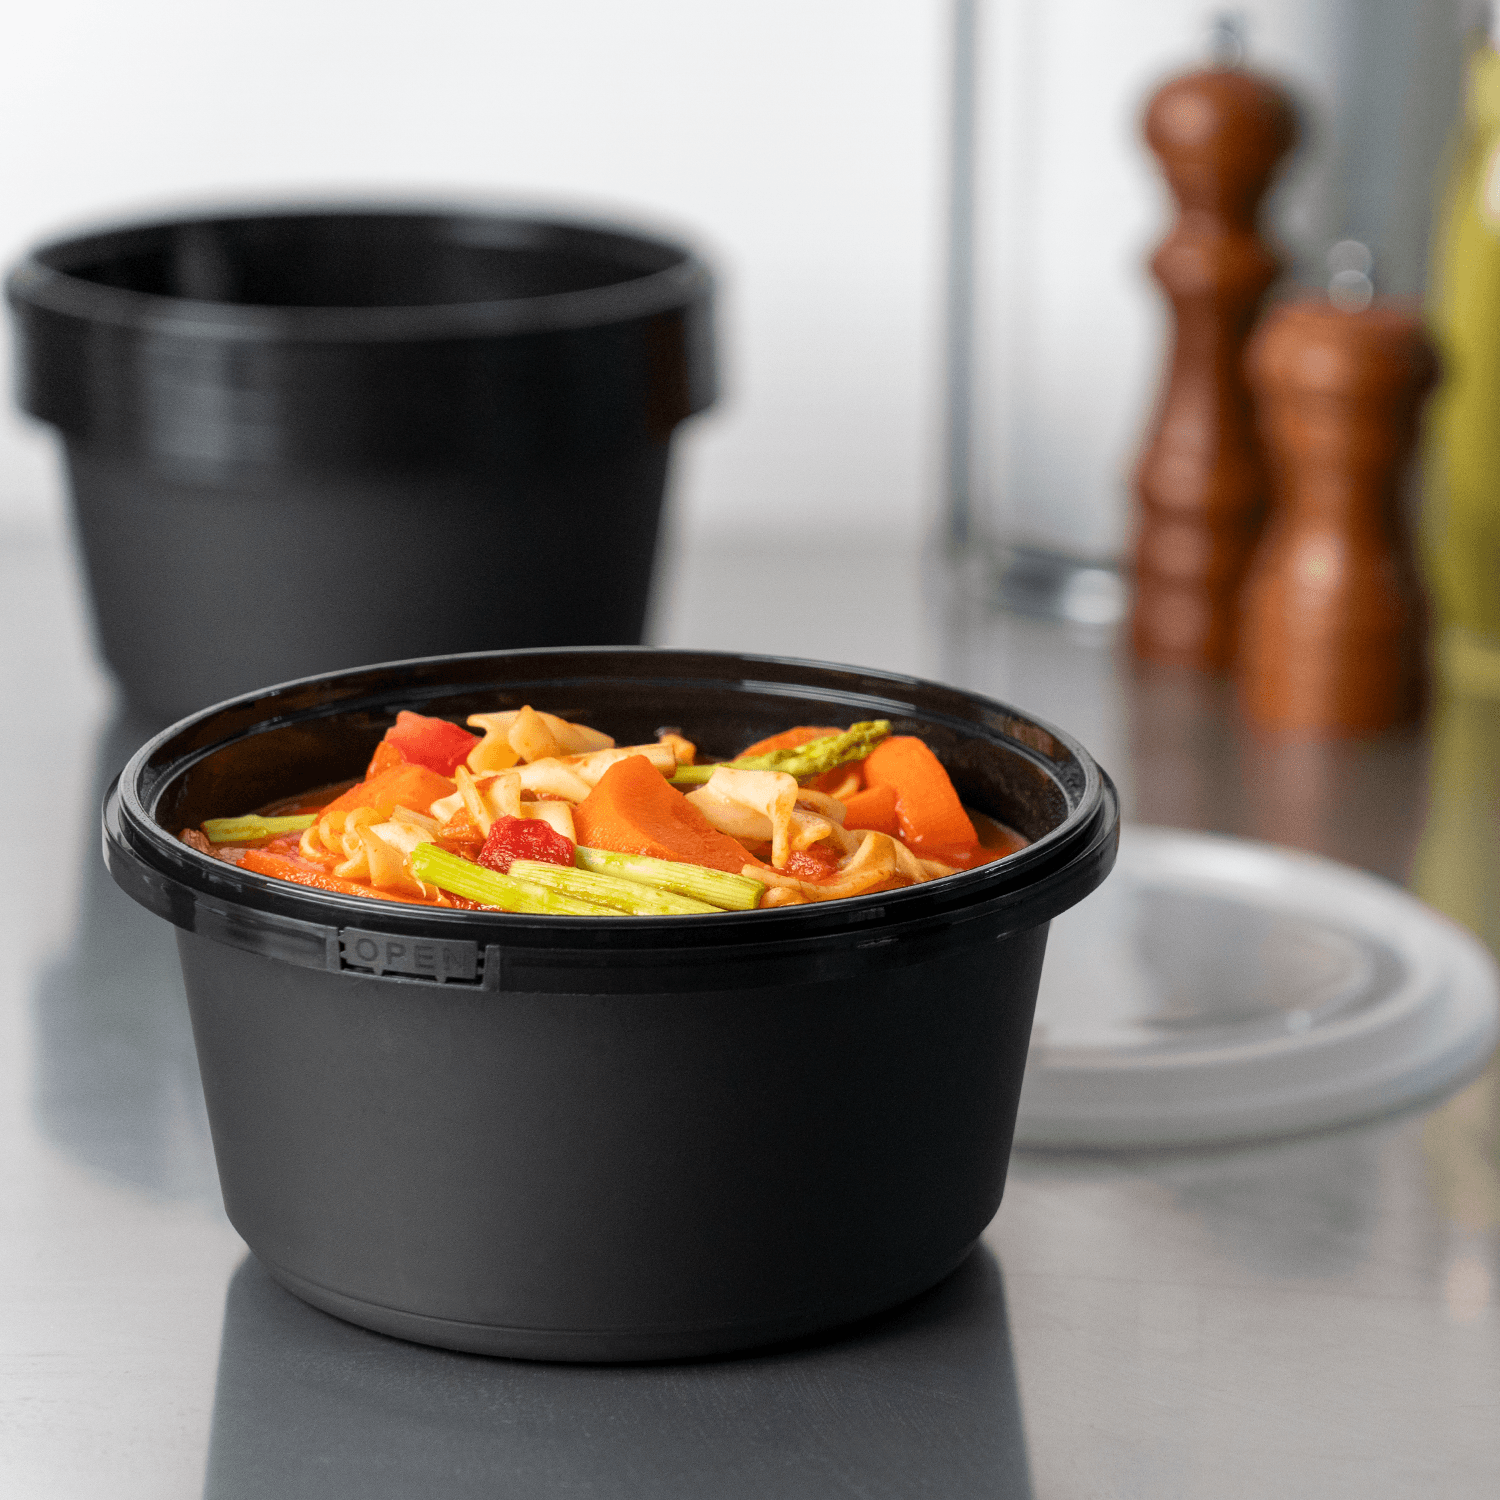 Karat 44oz PP Tamper Resistant Injection Molded Microwaveable Black Food Container w/Clear lid - 150 pcs